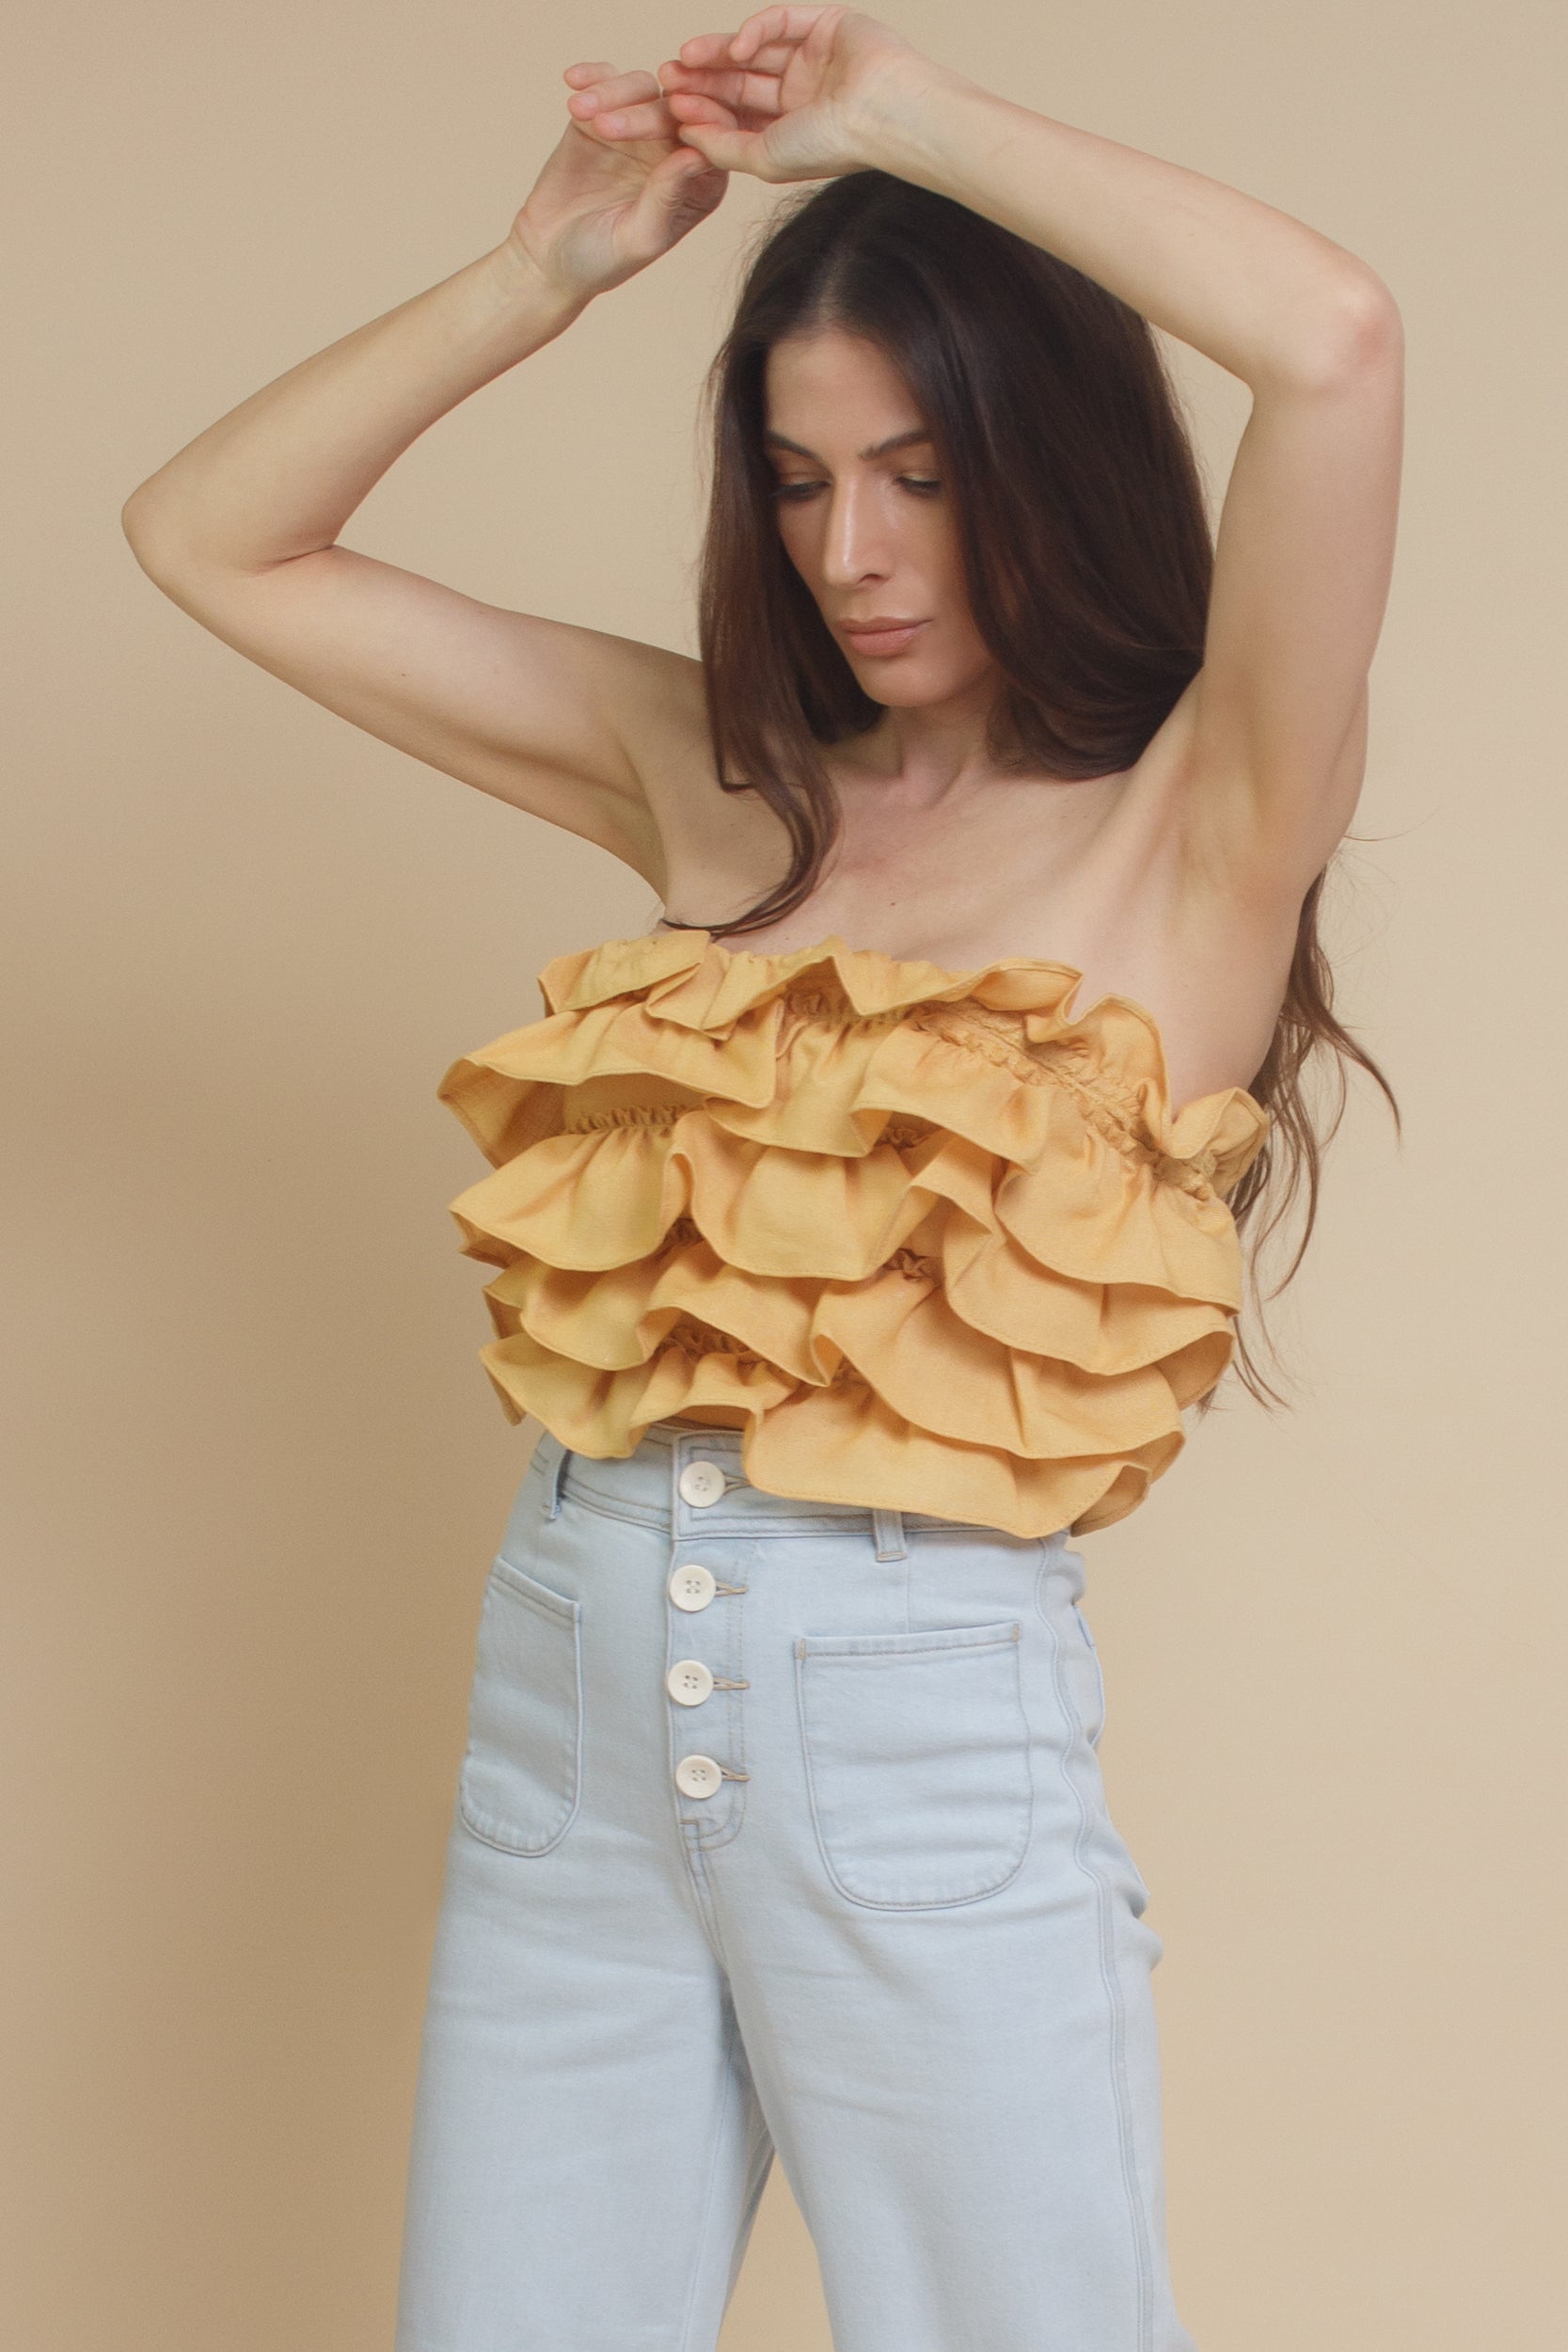 Mable ruffle tube top, with lace up back, in dusty yellow.